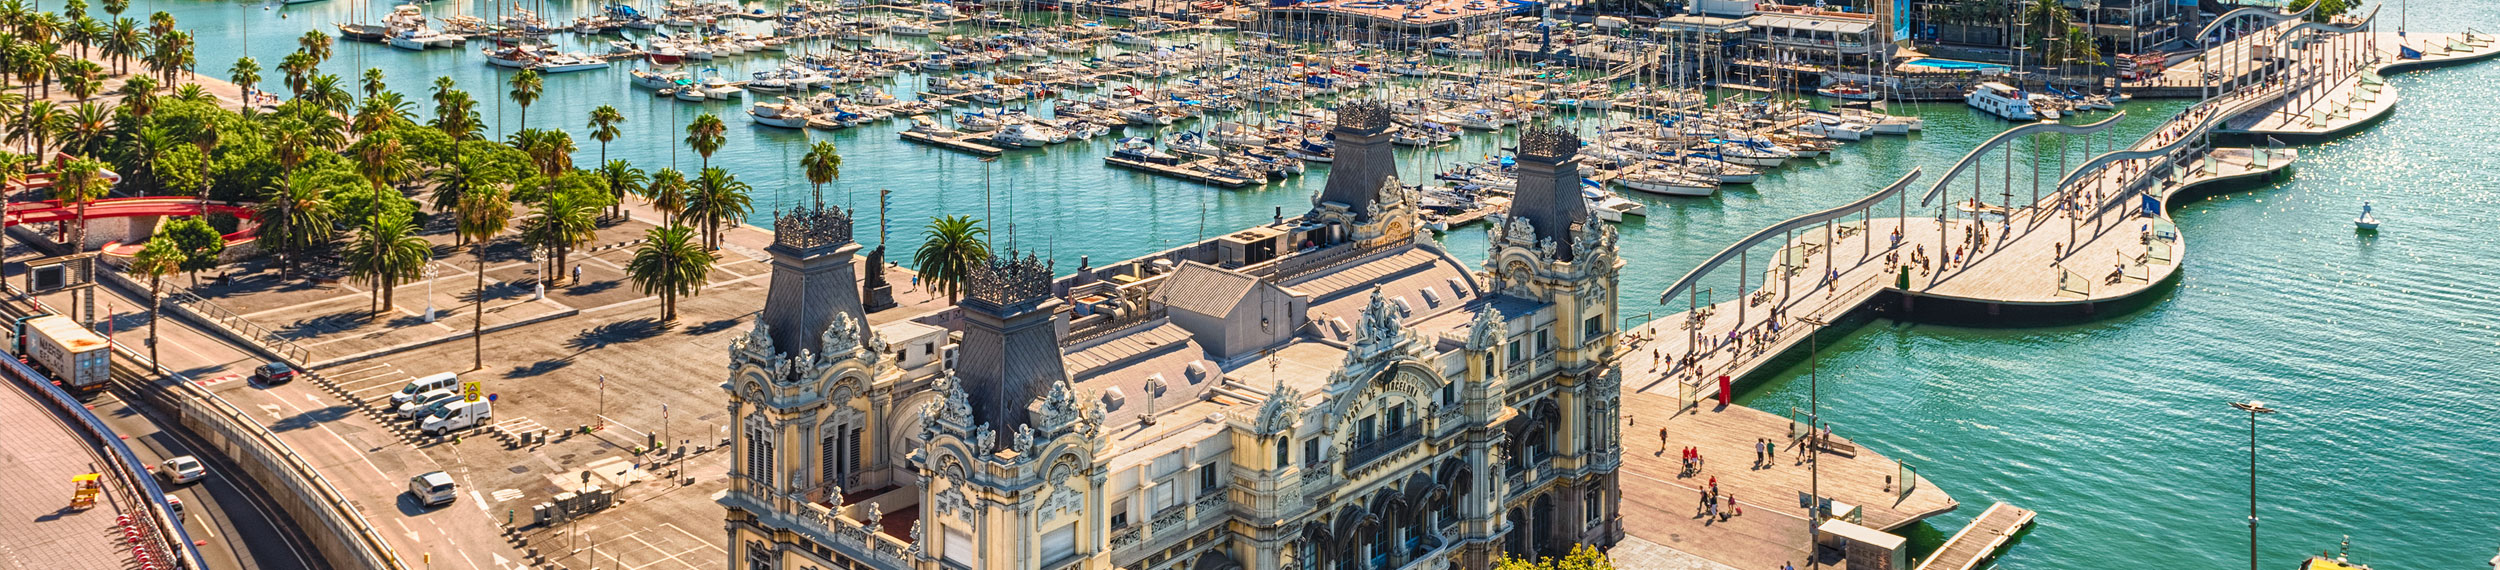 Aerial view of the Port Authority- Admiral Historic Authority building with the Port Vell harbor in the background in Barcelona, Spain.